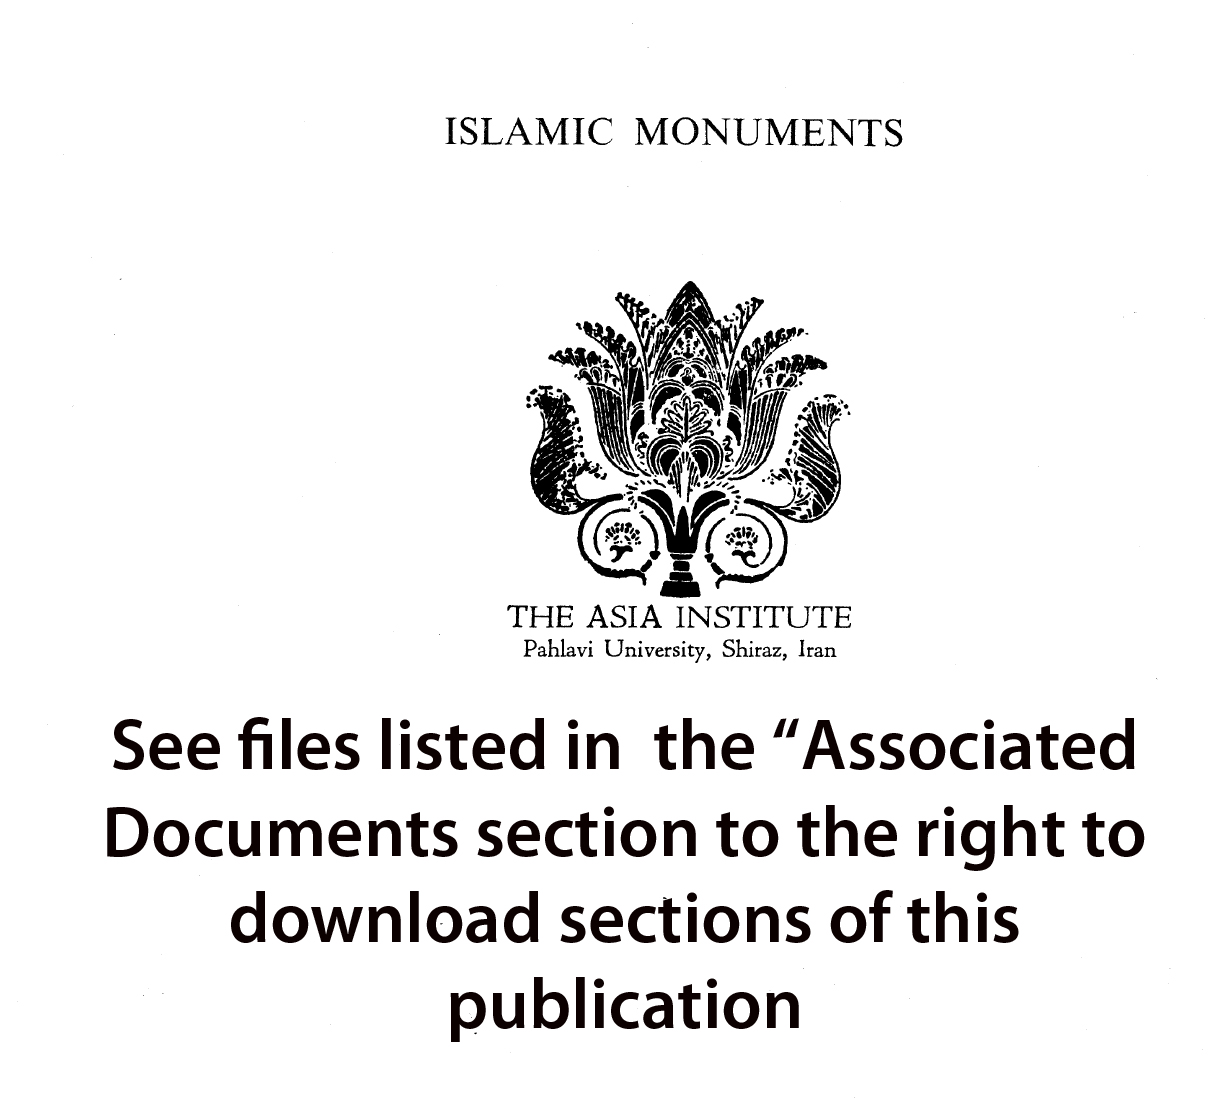 Imam Riza Shrine Complex - <div><span style="font-weight: bold;">Please see the files listed above in "Associated Documents" to download sections of this book.</span></div><div><br></div>Published by the Asia Institute in Shiraz in 1976, "The Holy Shrine of Imam Reza, Mashhad" summarizes the findings of an architectural survey headed by architect Bijan Saadat with associate architect Riccardo Sardarelli and assistant architect Piero Degl'Innocenti. It consist of four volumes:<br><br><i>Volume I</i>: Nine folding plates and legends (ArchNet files <a href="http://archnet.org/library/files/one-file.jsp?file_id=1501" target="_blank">FLS1272</a> and <a href="http://archnet.org/publications/1226" target="_blank">FLS1273</a>, containing the plan and eight cross-sections respectively).<br><i>Volume II</i>: 79 photographic plates with captions<br><i>Volume III</i>: Historic and architectural description in English, bibliography and glossary, 57 pages<br><i>Volume IV</i>: Historic and architectural description in Persian, 76 pages<div><br></div><div><br></div><div><br></div>